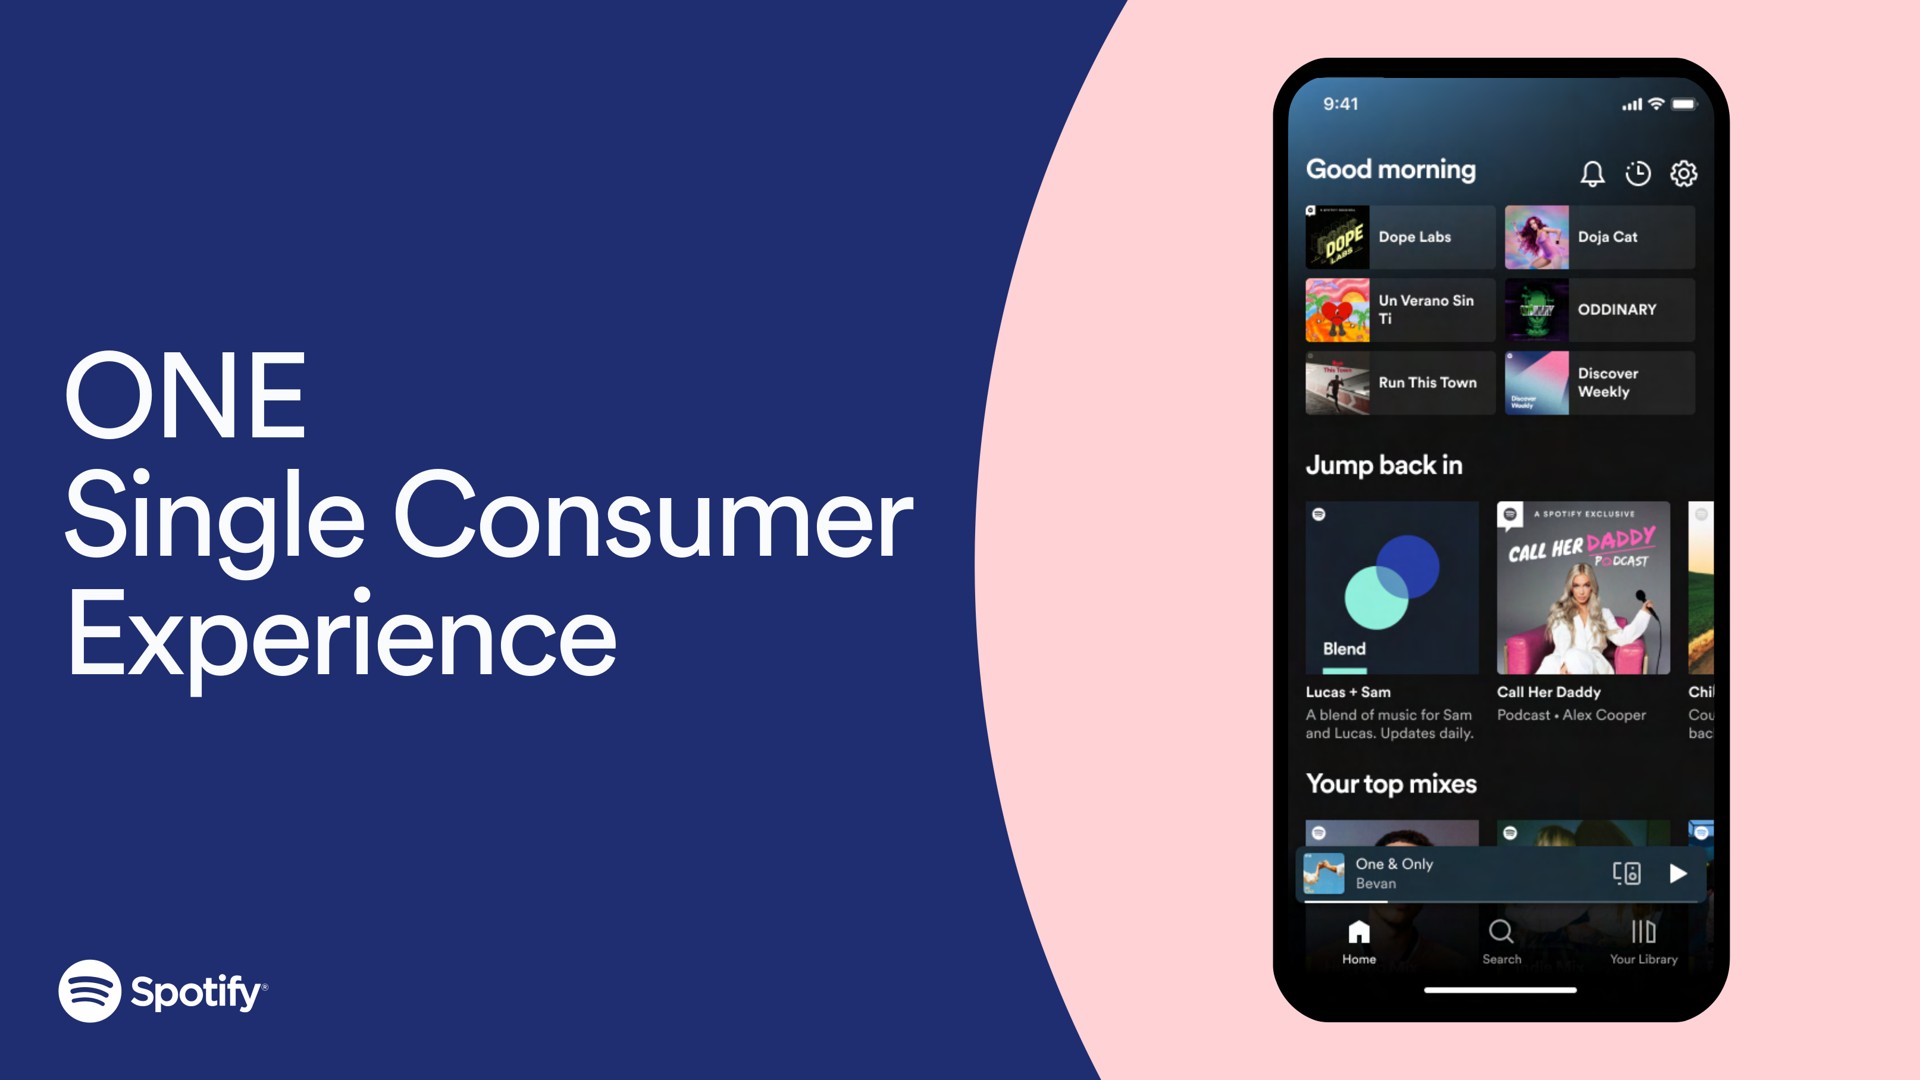 one single consumer experience | Spotify